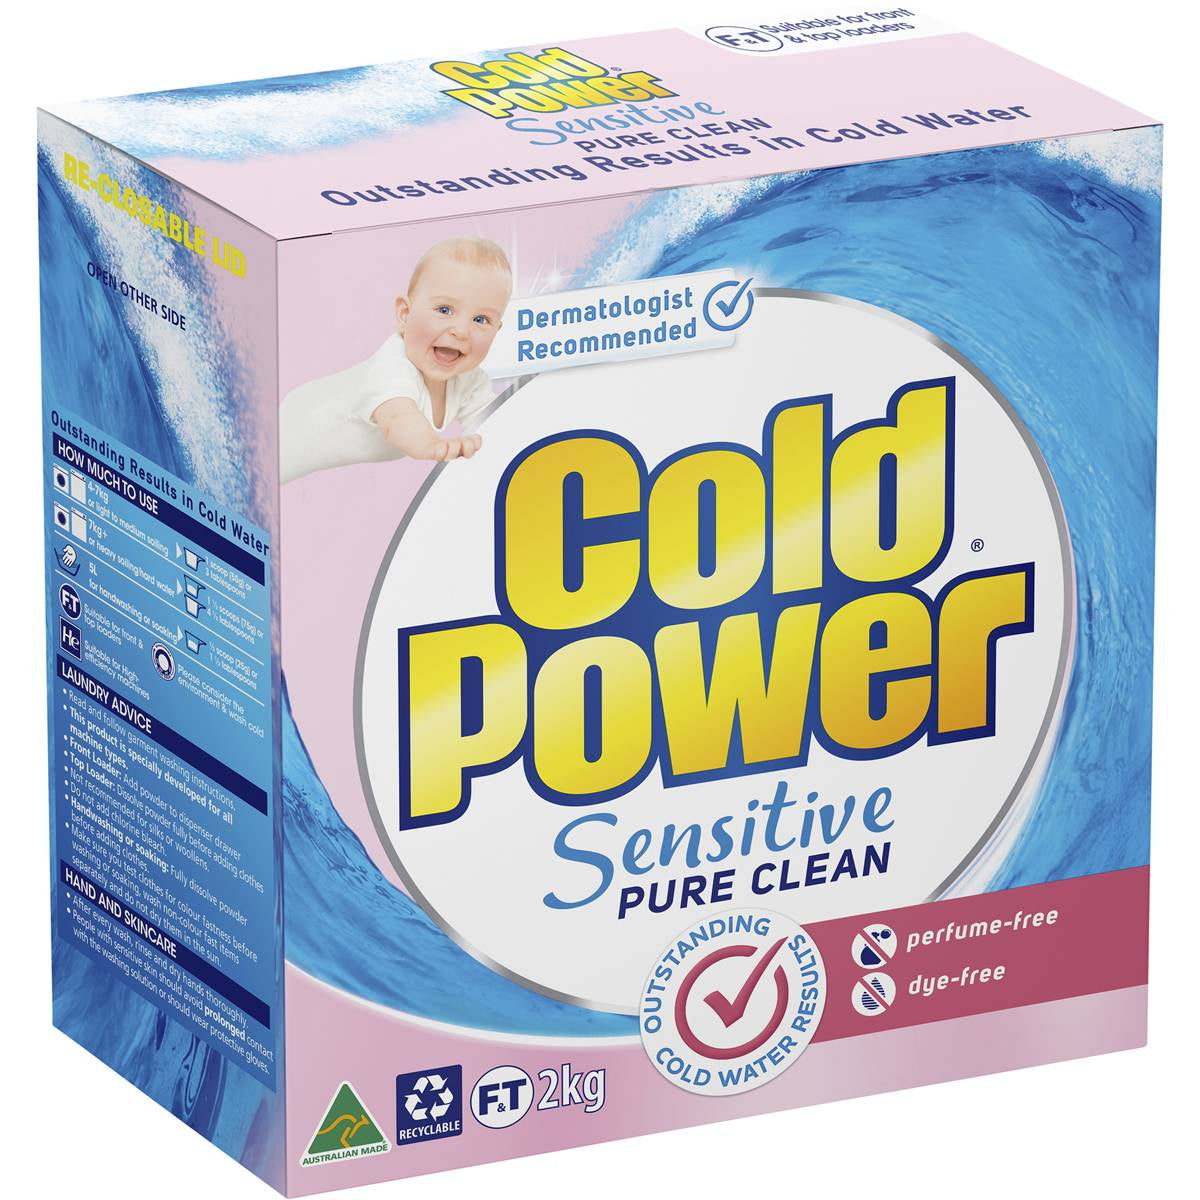 Cold Power Laundry Powder Front and Top Loader Sensitive Pure Clean 2kg